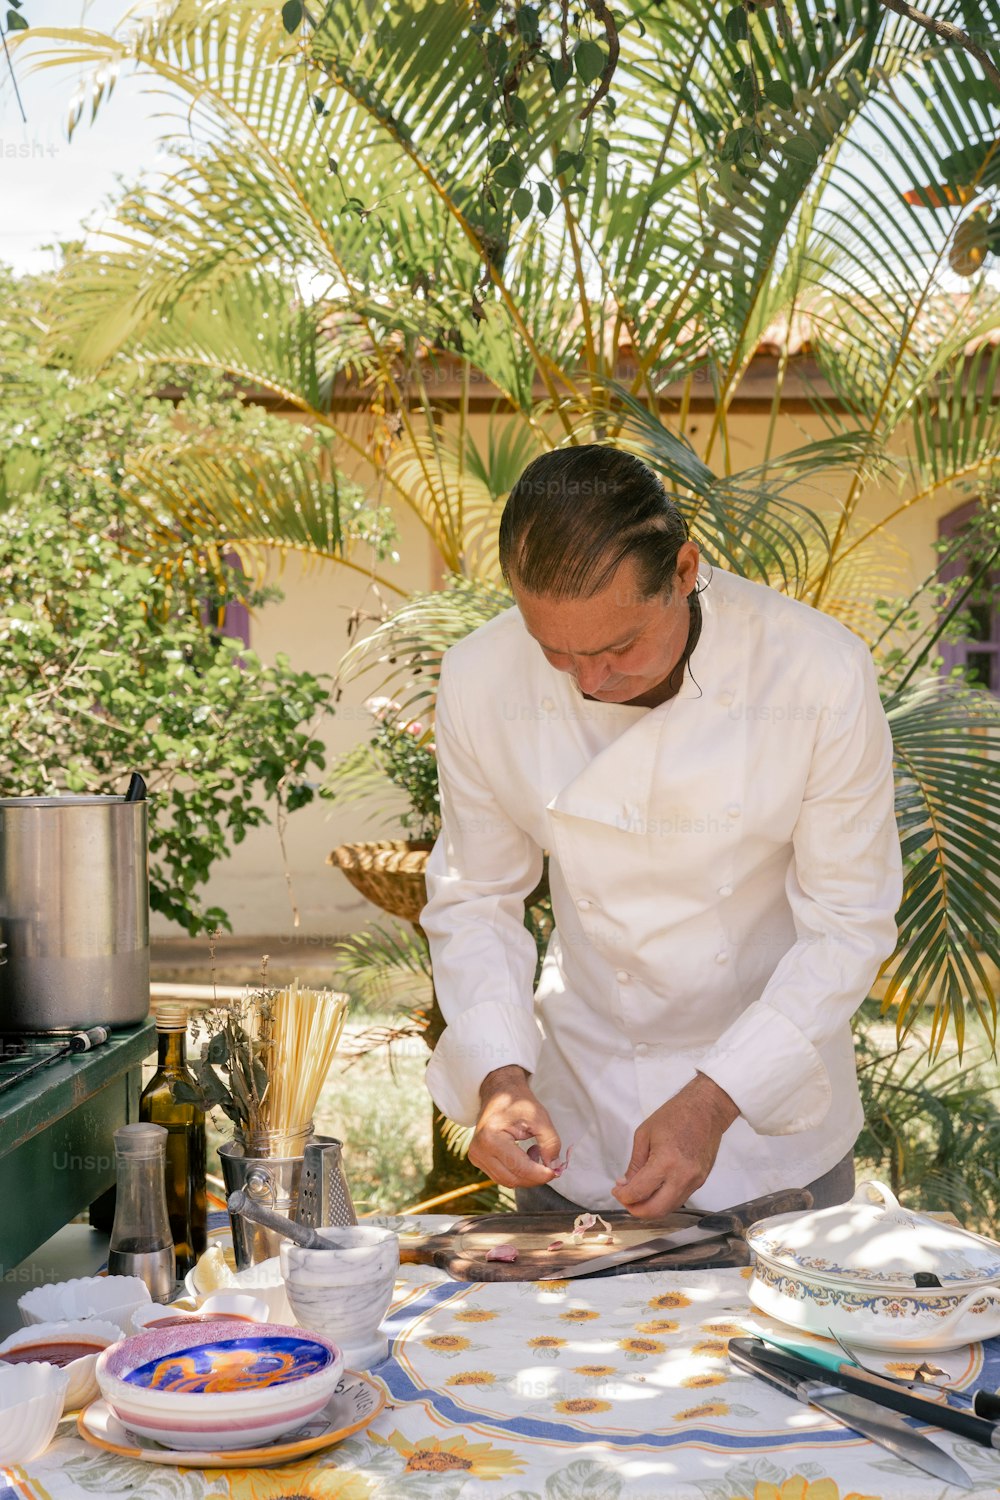 a man in a chef's uniform preparing food on a table